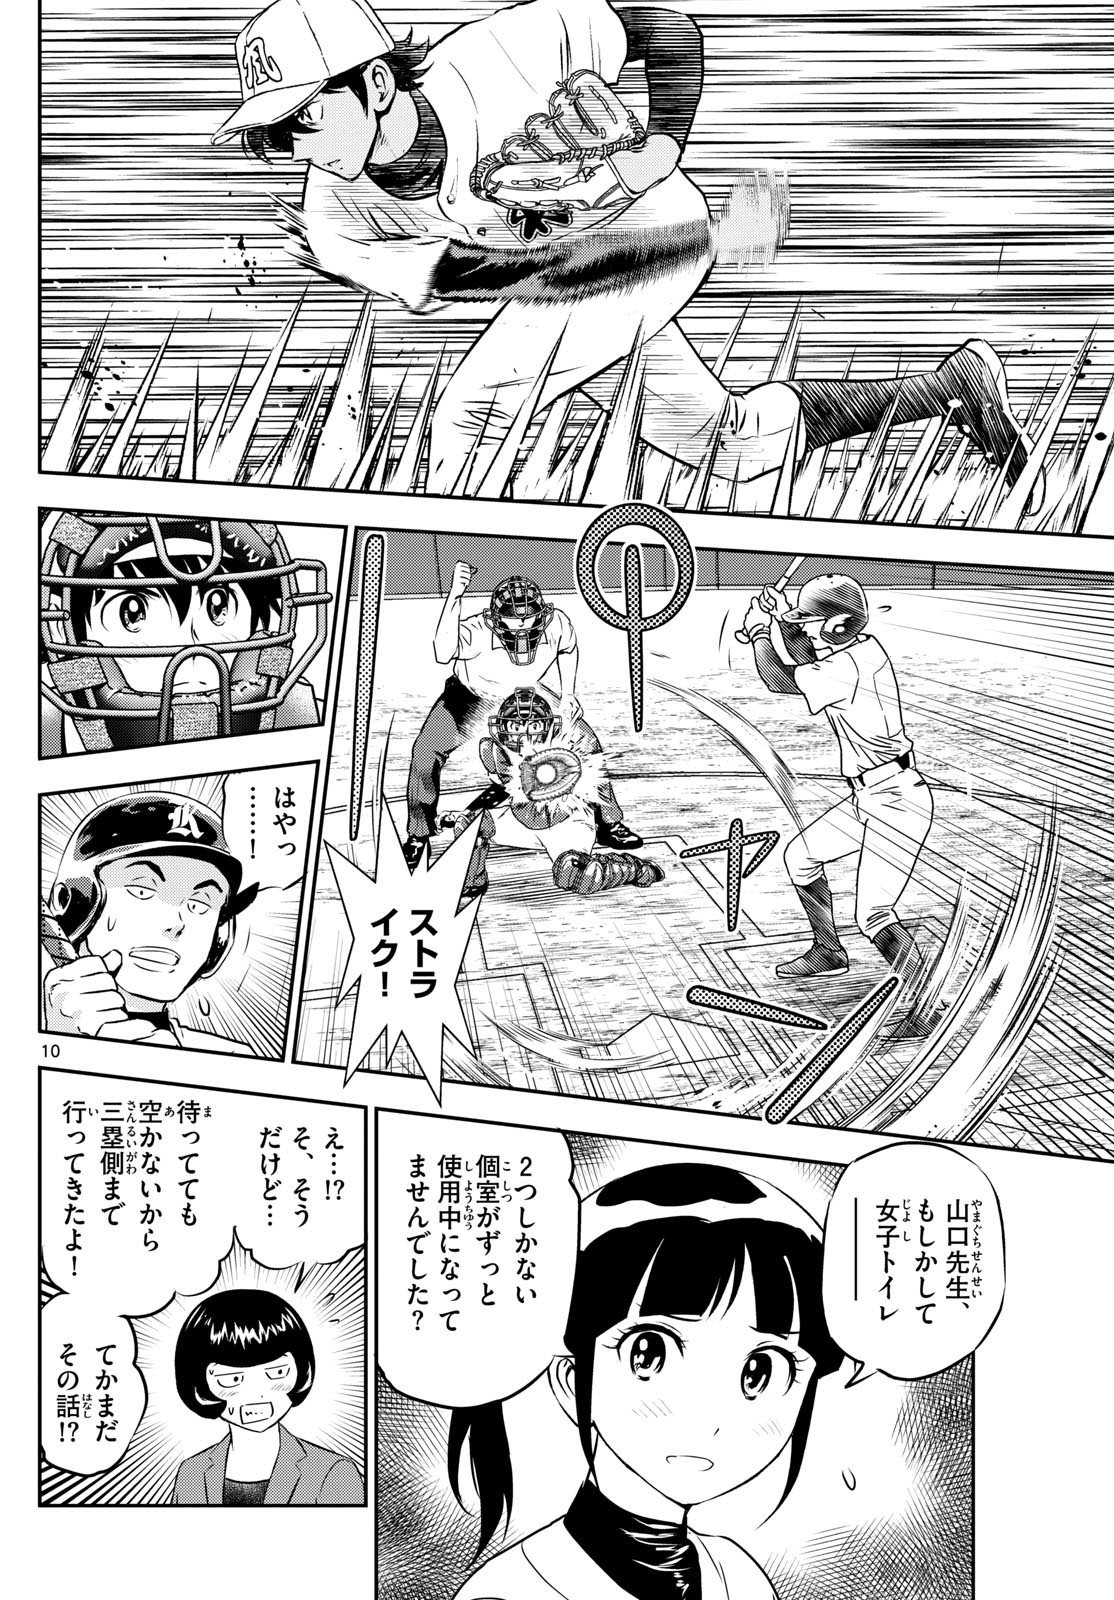 Major 2nd - メジャーセカンド - Chapter 283 - Page 10